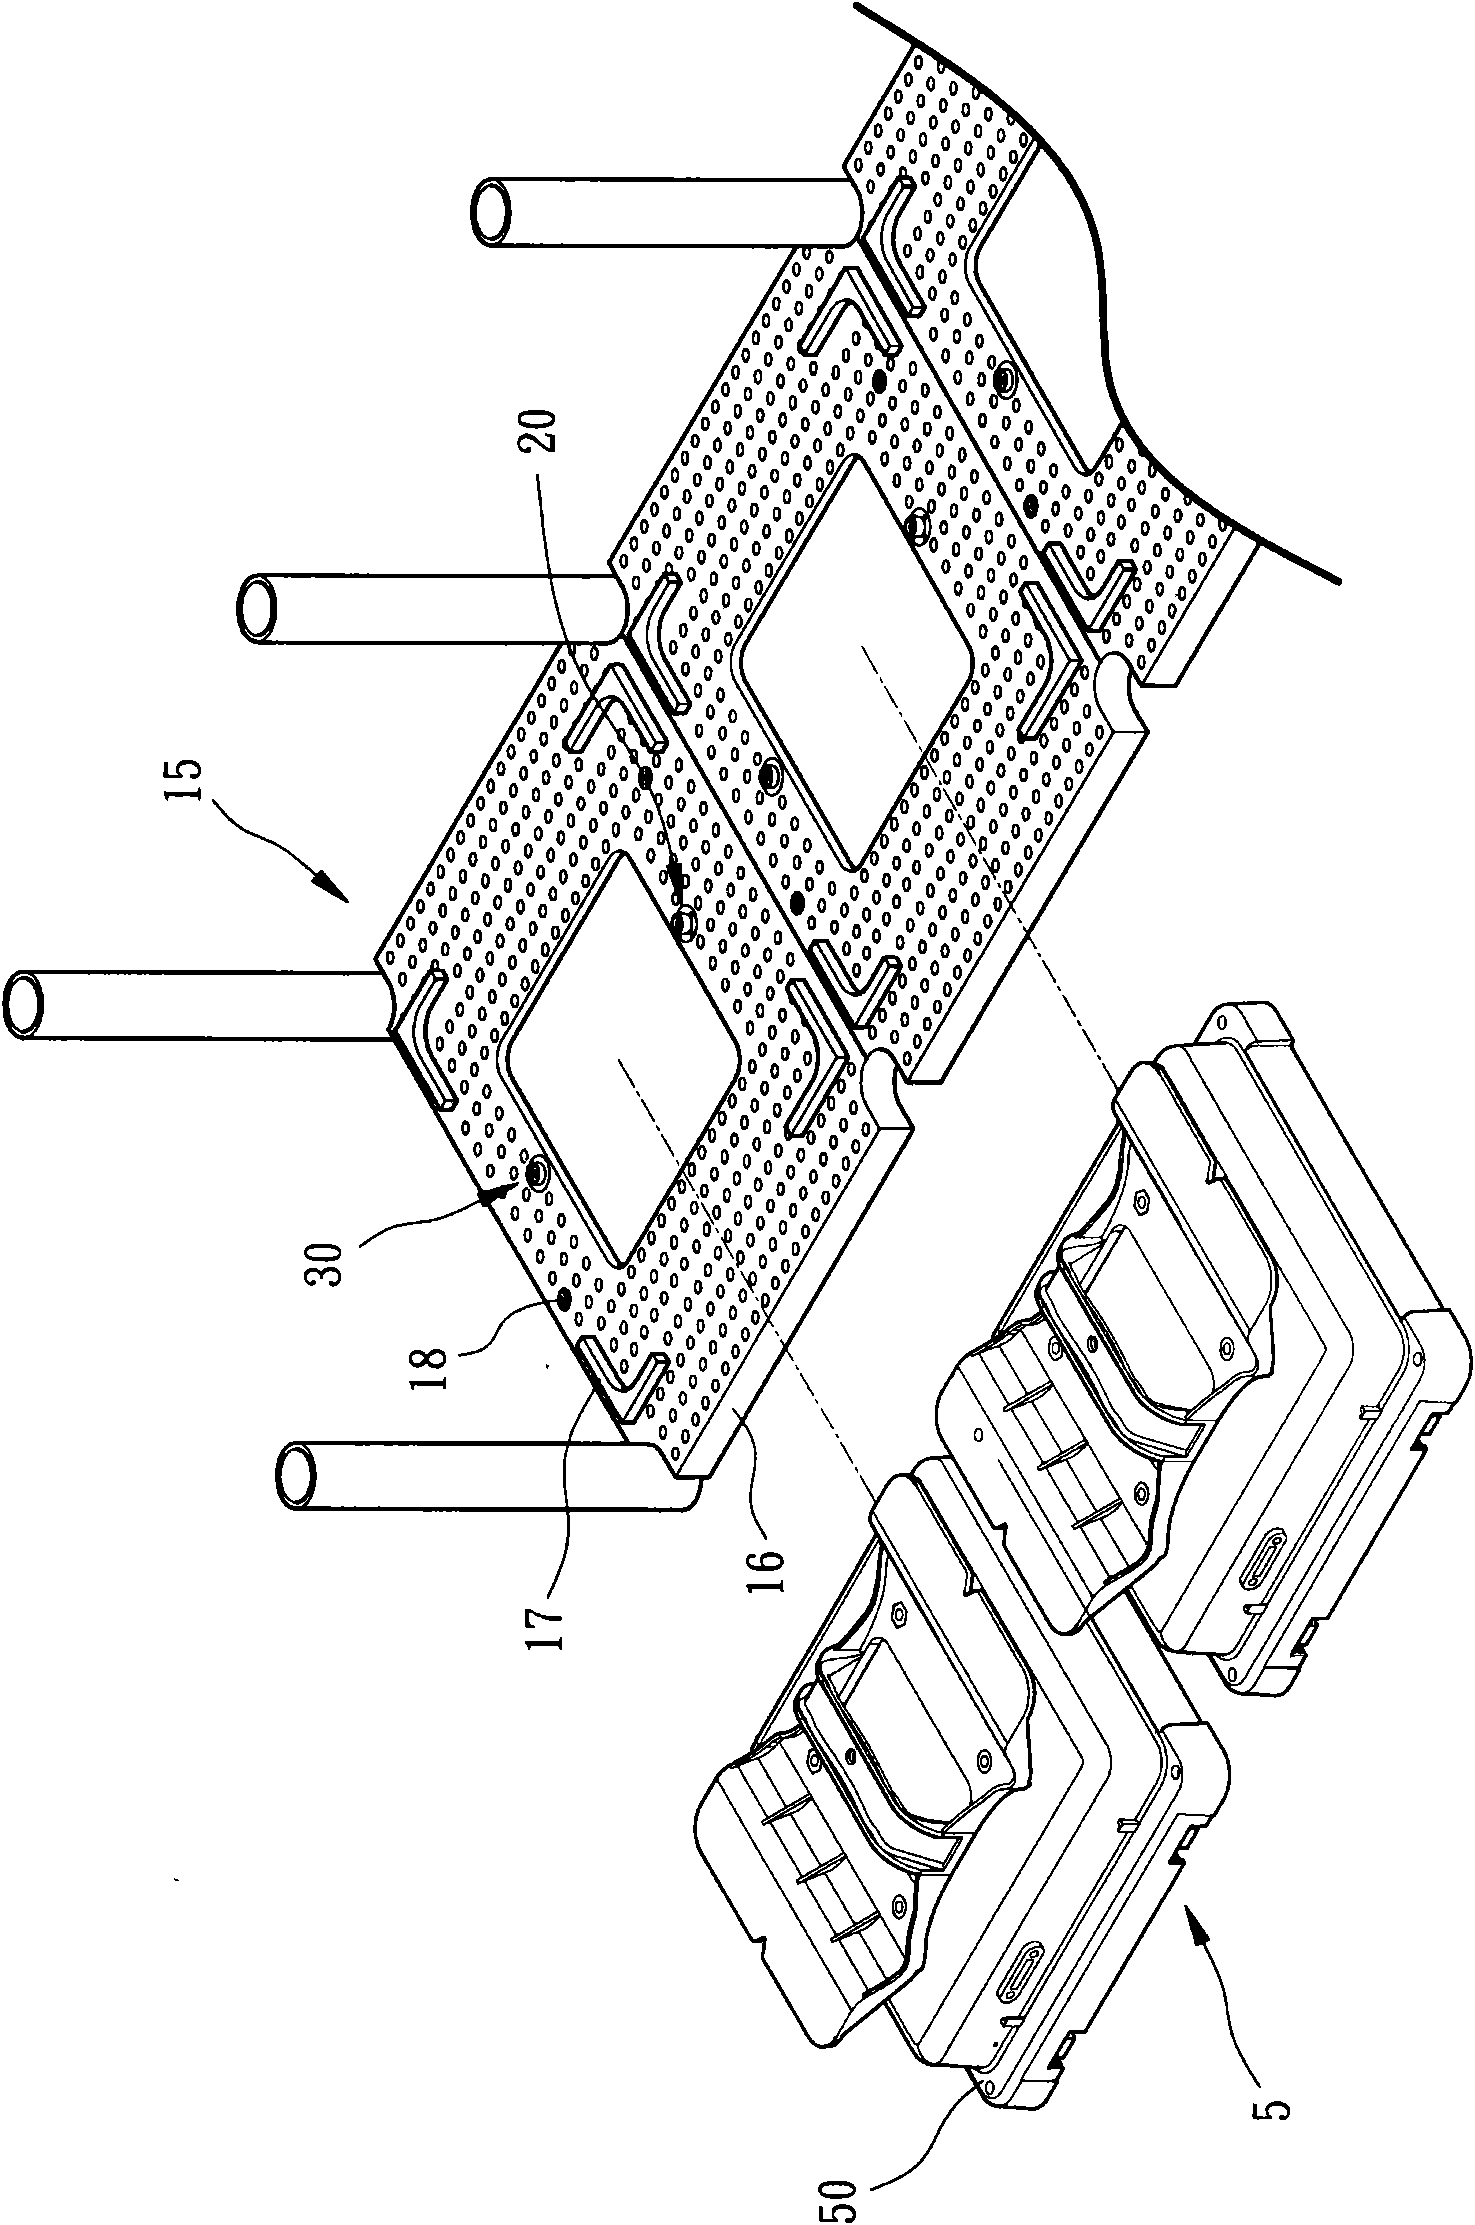 Pressure-maintaining system applied to transplanting container